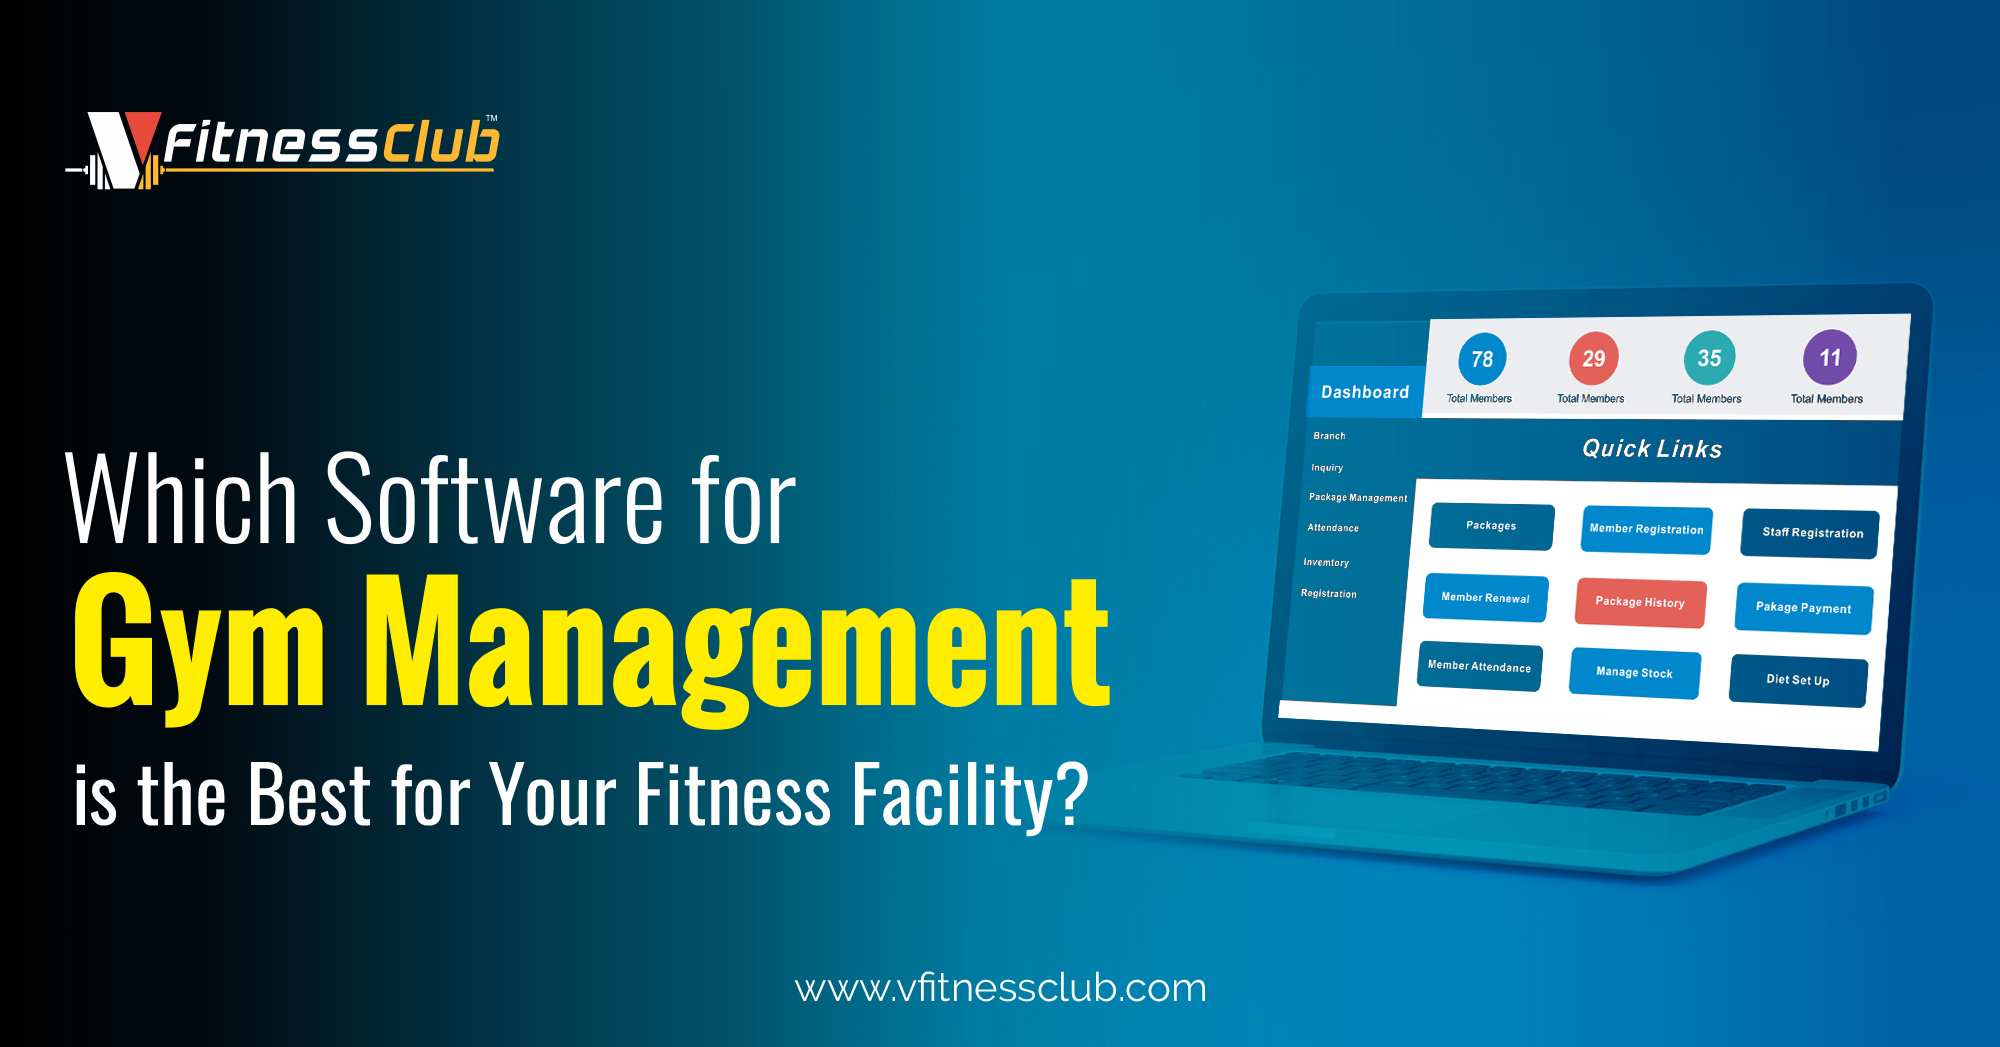 Which Software for Gym Management is the Best for Your Fitness Facility?